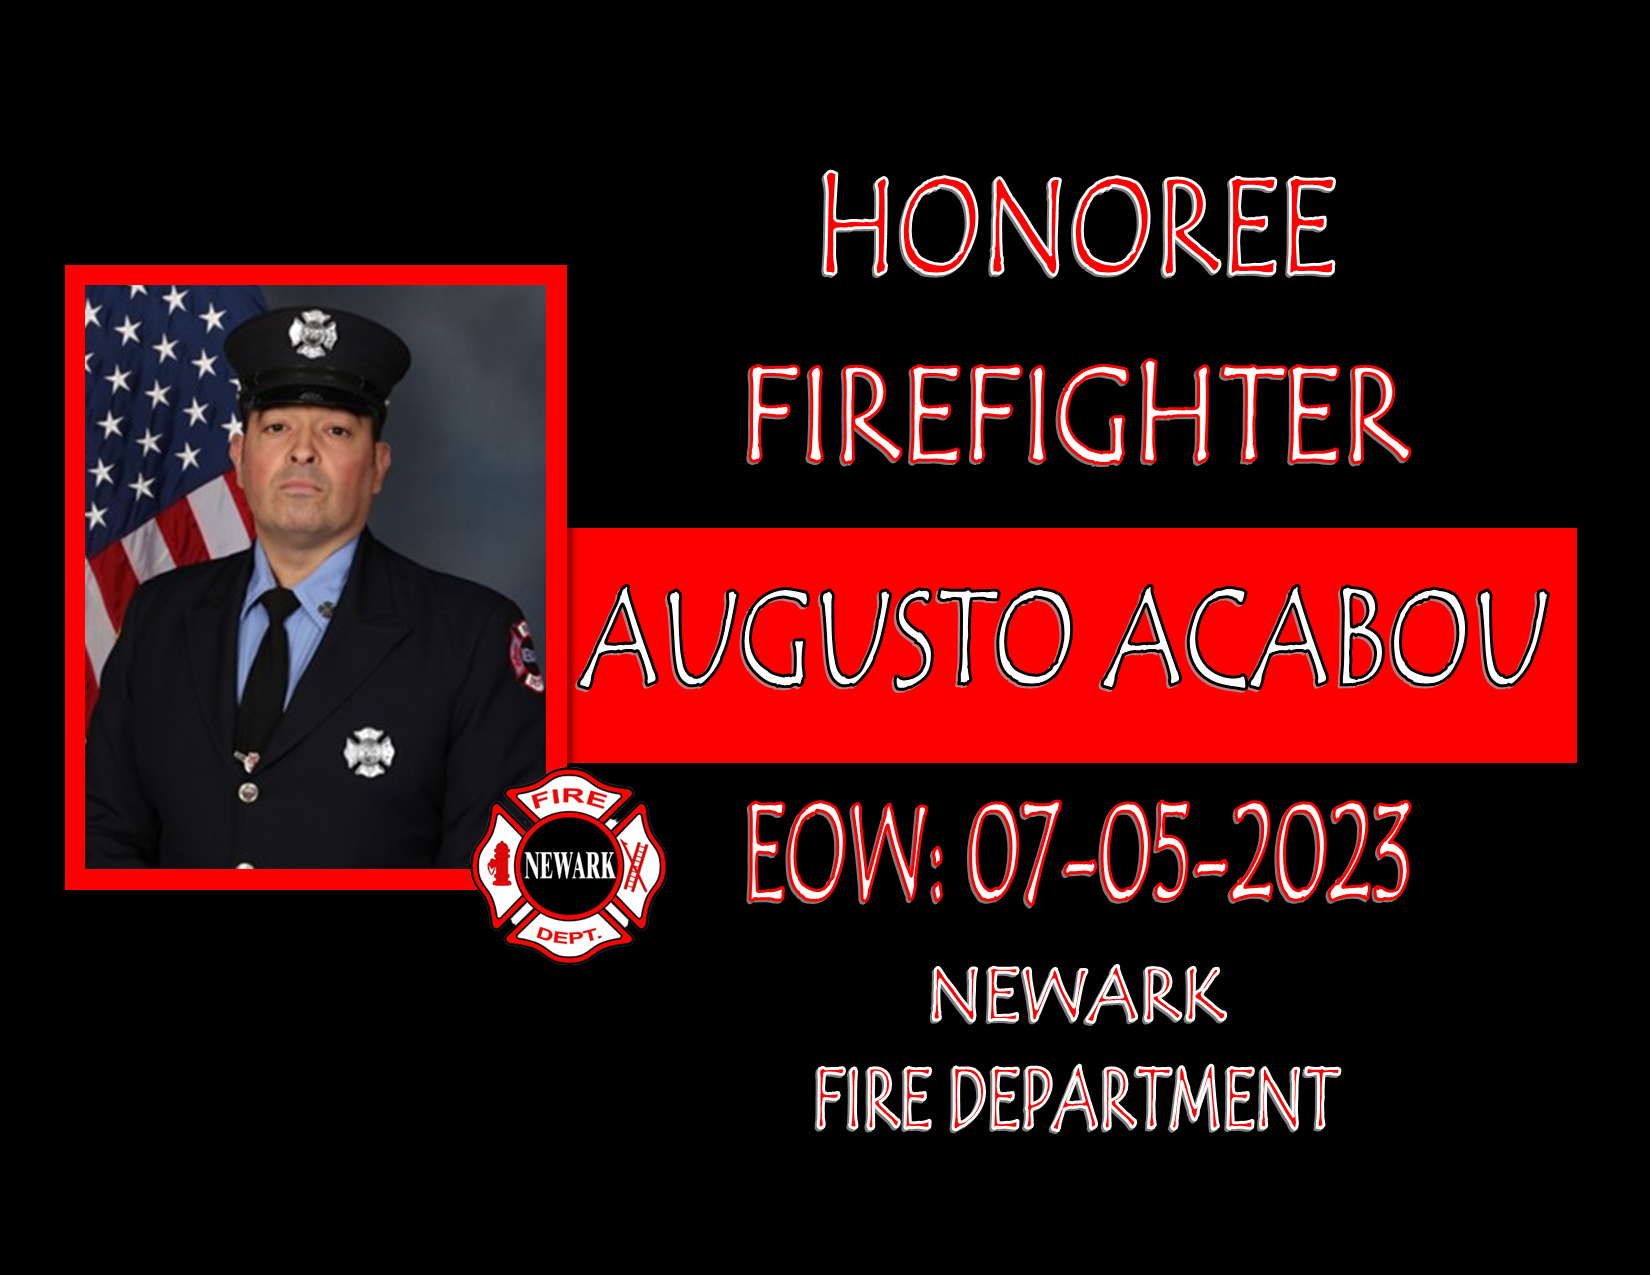 Augusto Acabou Honoree Photo PNG.png